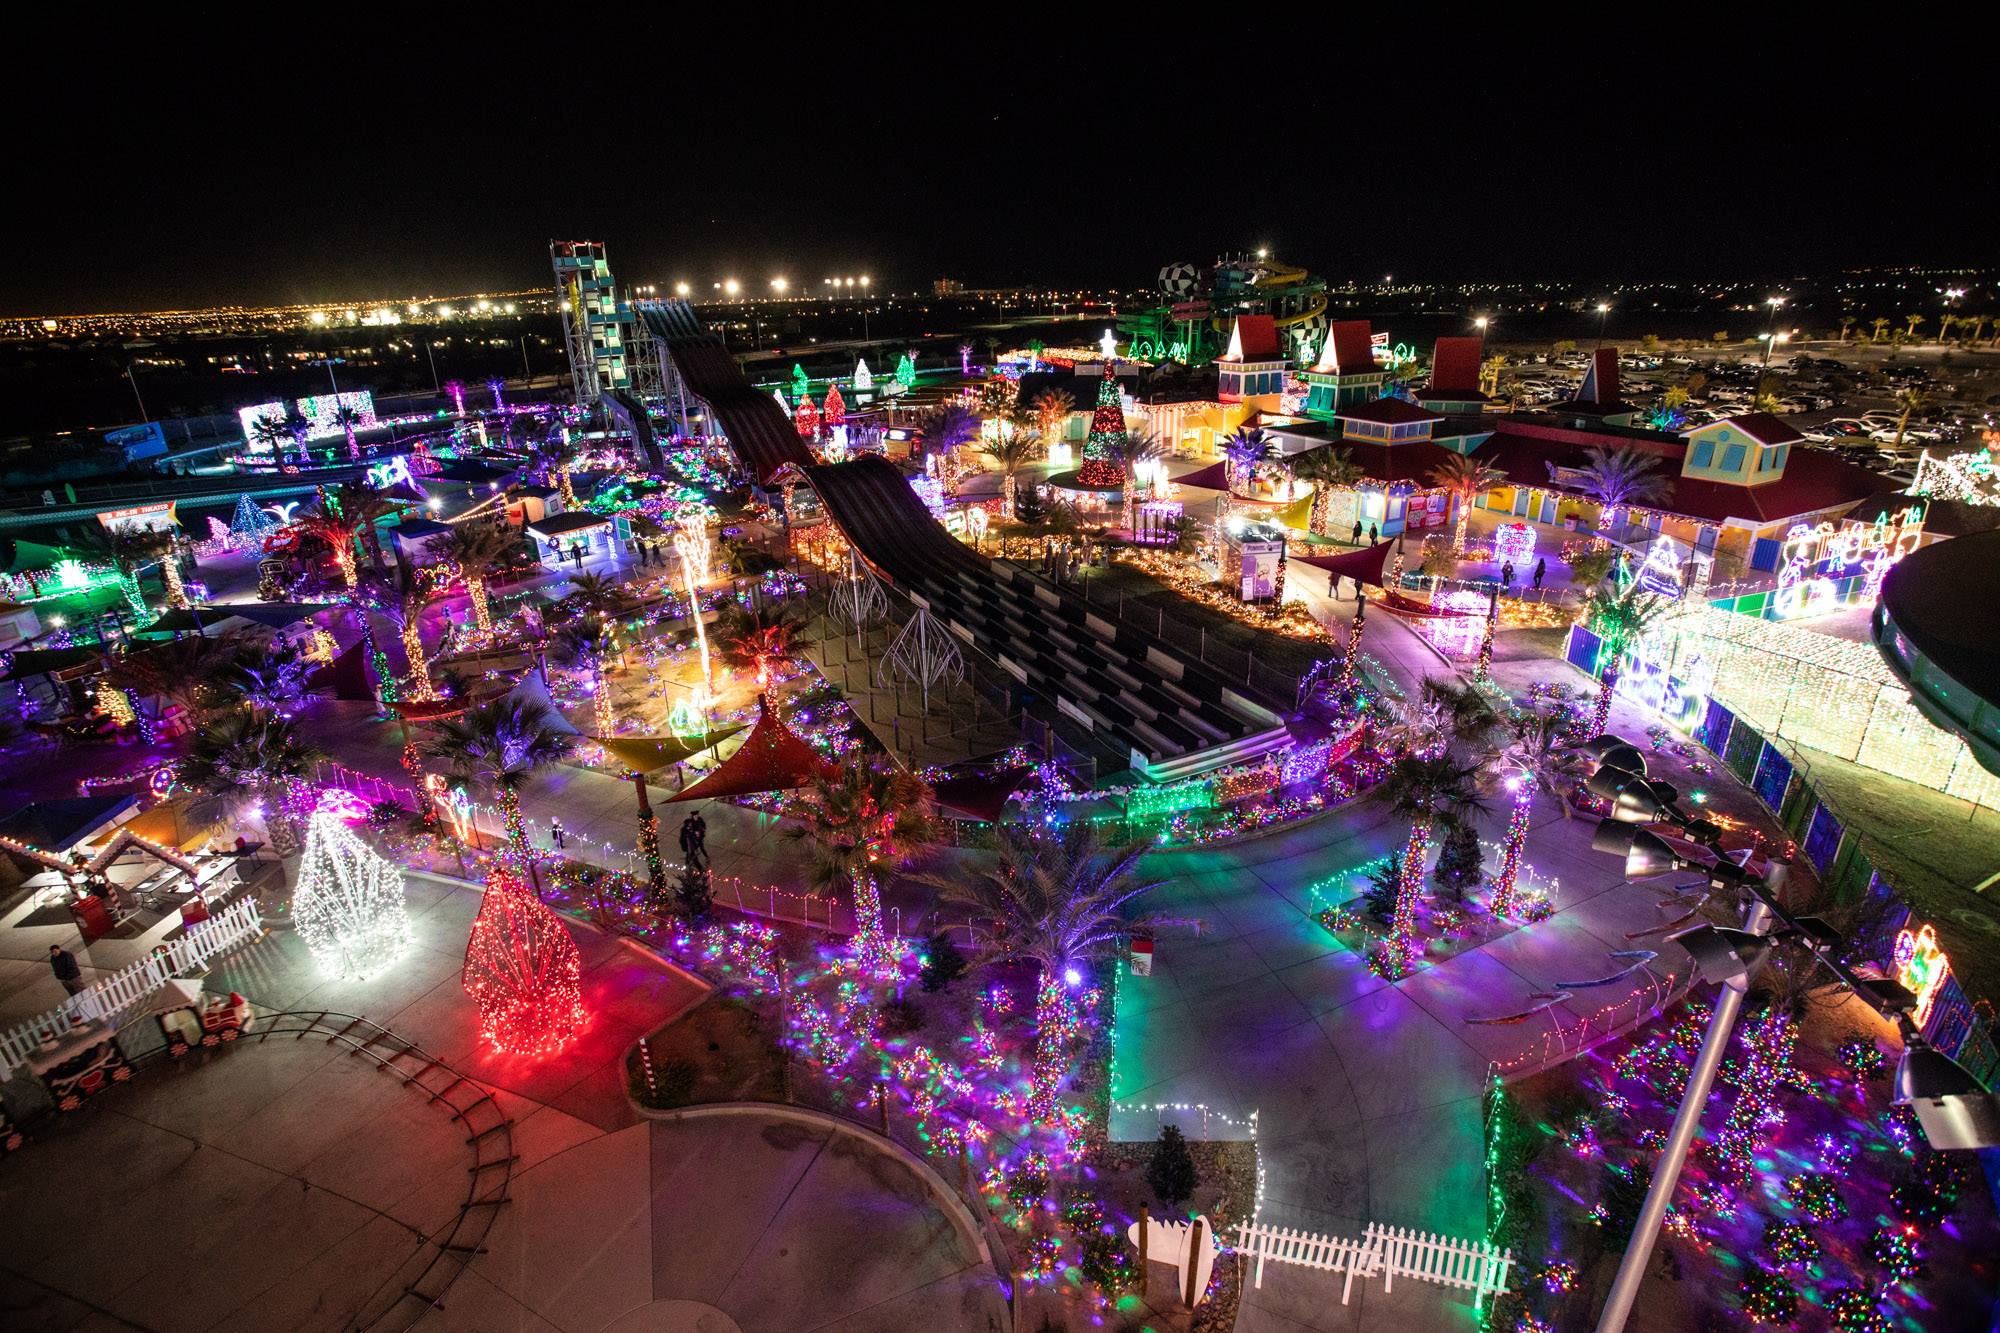 Cowabunga Bay Christmas Town 2022 Visit This Unique Holiday Attraction In Nevada: Christmas Town